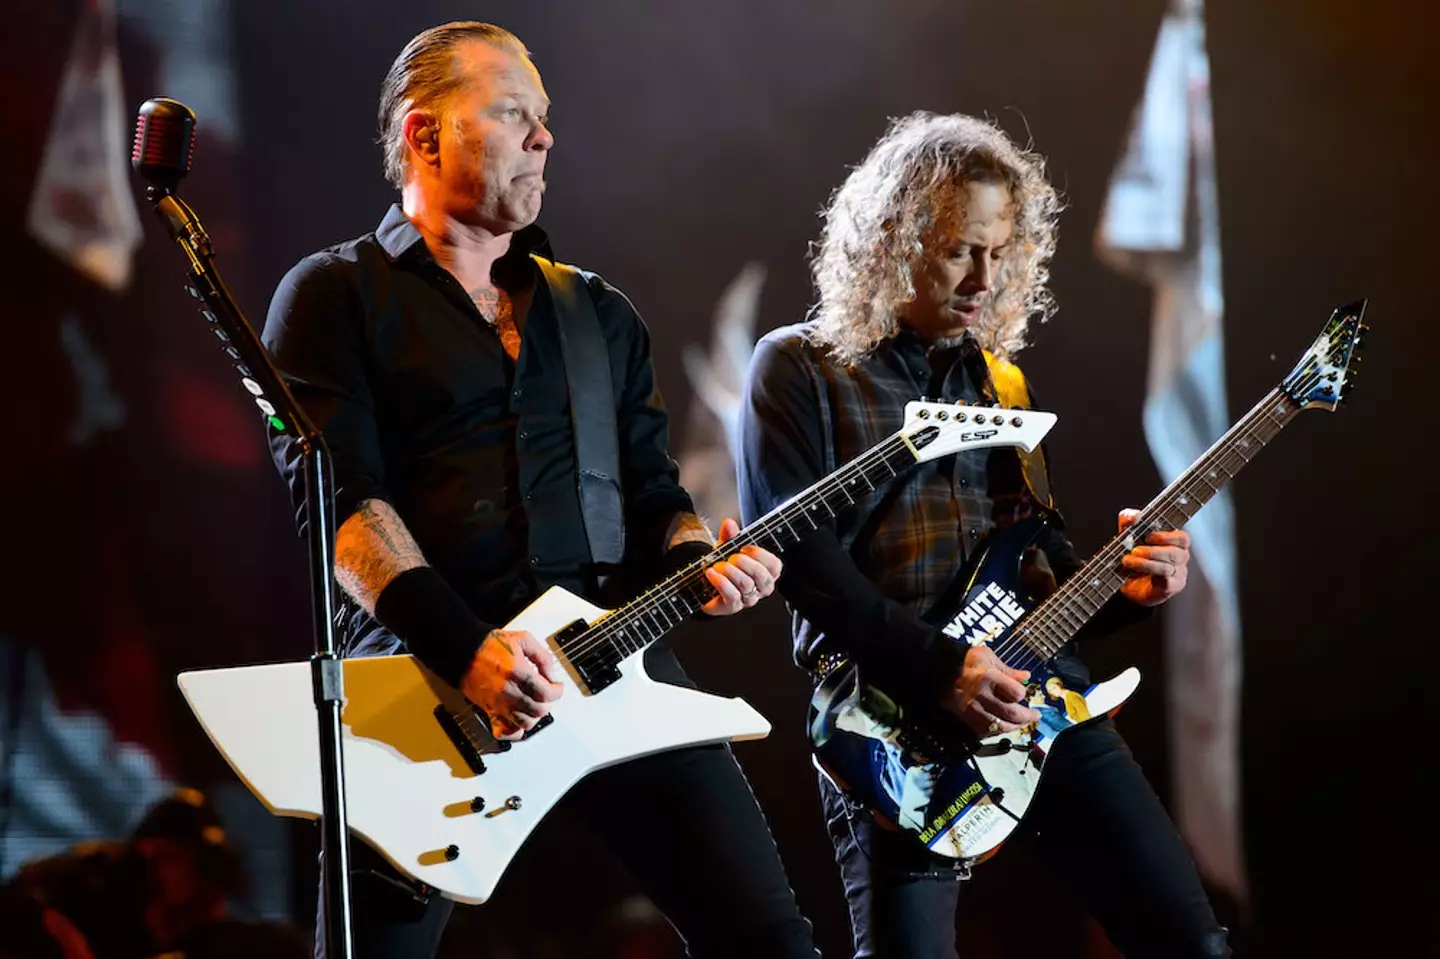 Metallica shared about the incredible moment on social media.